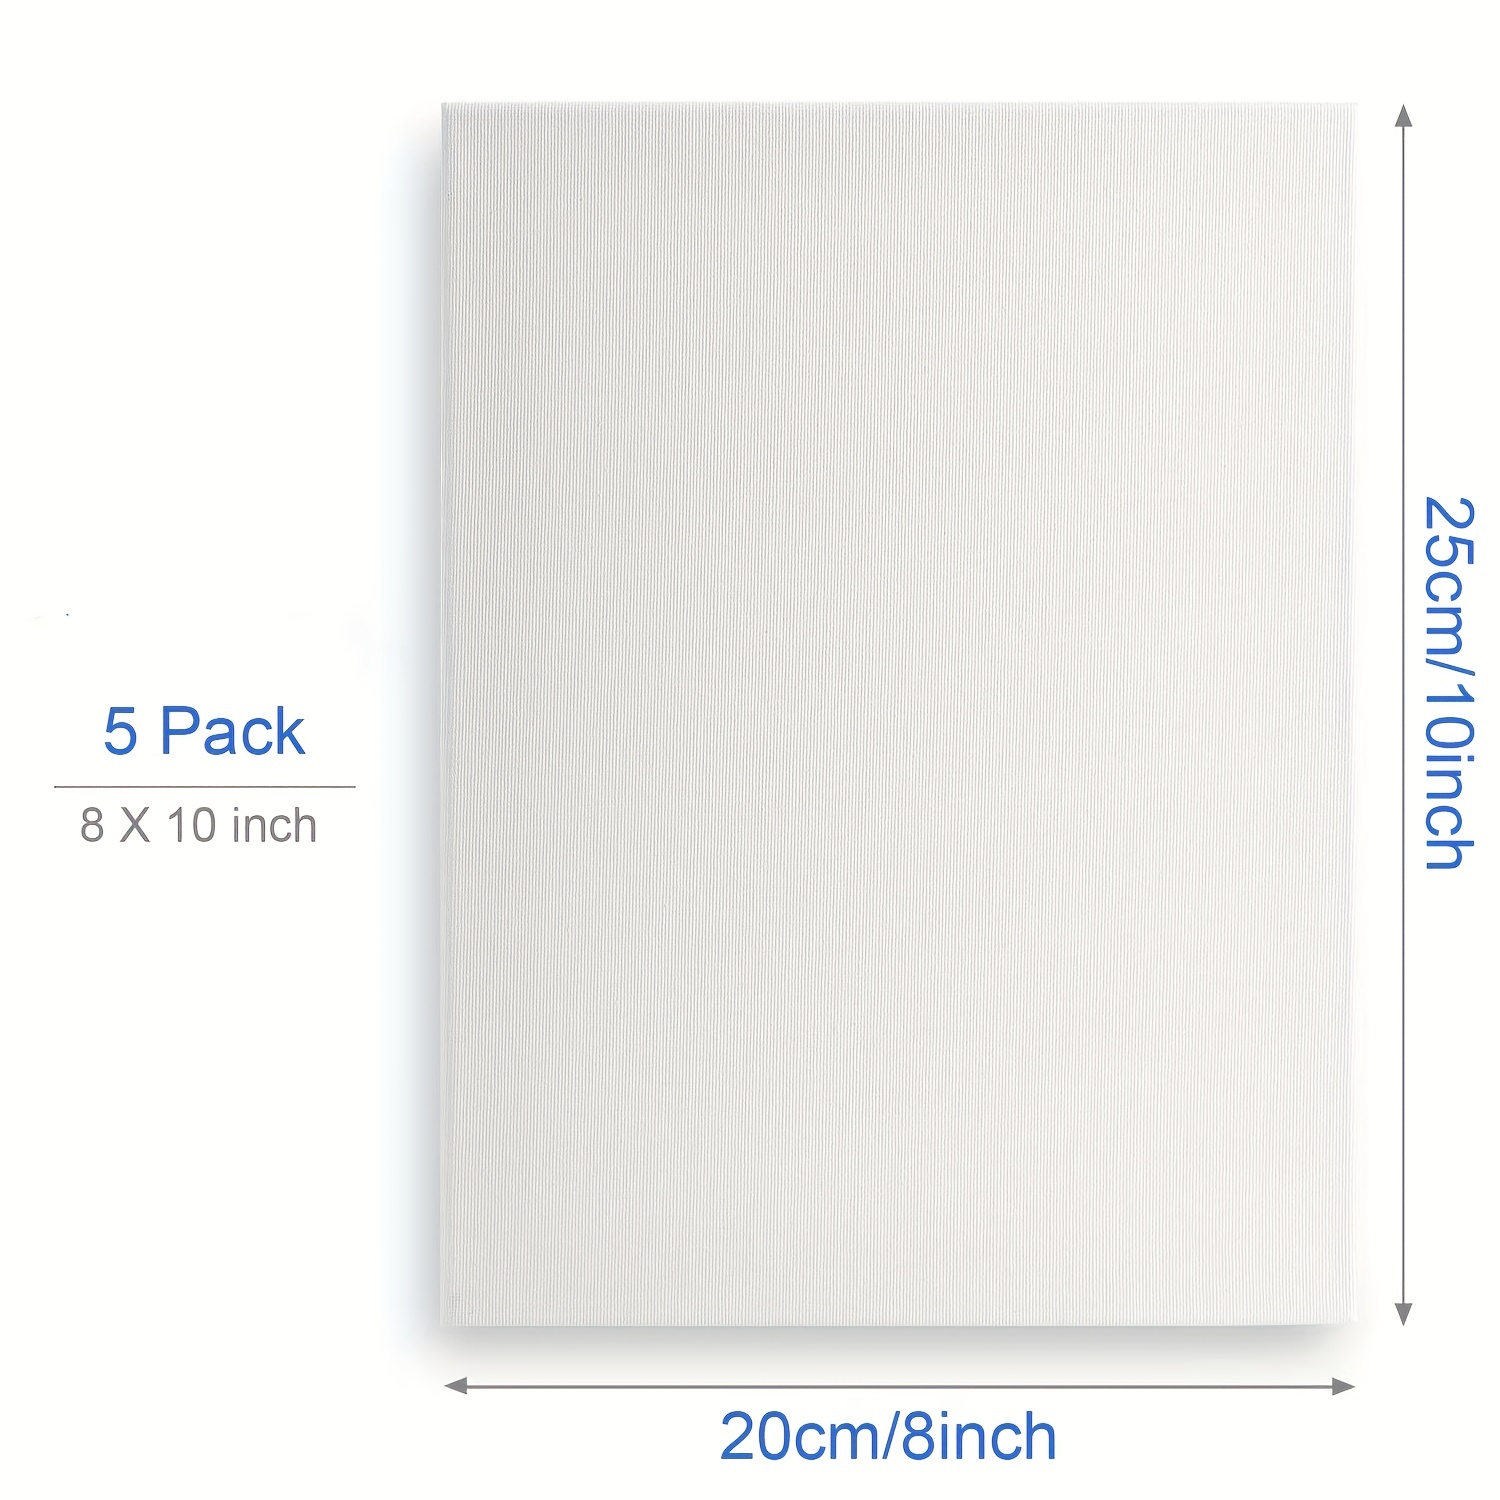  Crafts 4 All Canvases for Painting - Blank Canvas Boards,  Triple Primed 100% Cotton Canvas Panels for Acrylic, Oil & Watercolor Paint